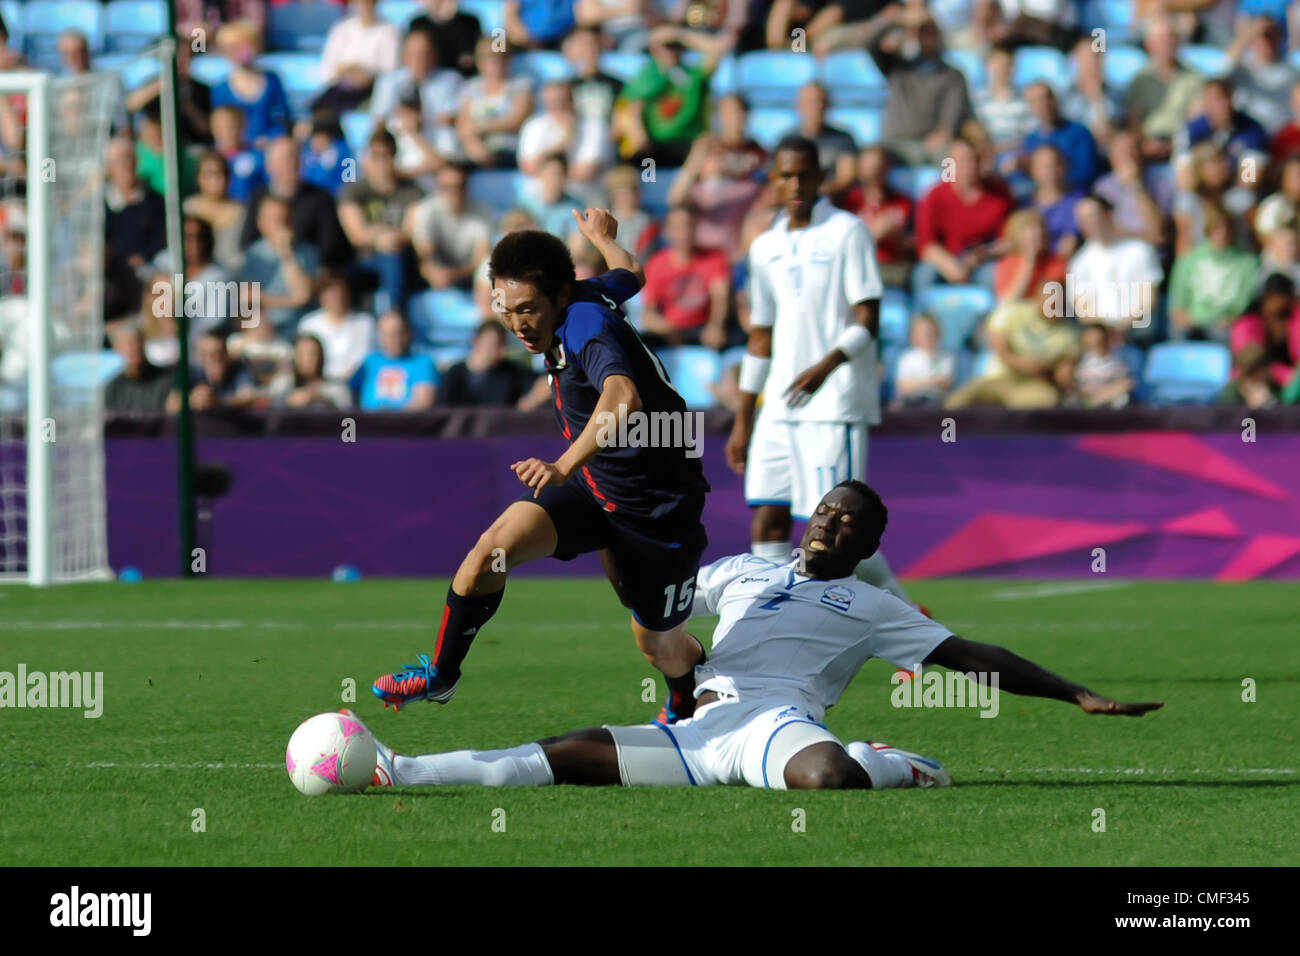 01.08.2012 Coventry, England. Wilmer CRISANTO (Honduras) tackles Manabu SAITO (Japan) during the Olympic Football Men's Preliminary game between Japan and Honduras from the City of Coventry Stadium Stock Photo